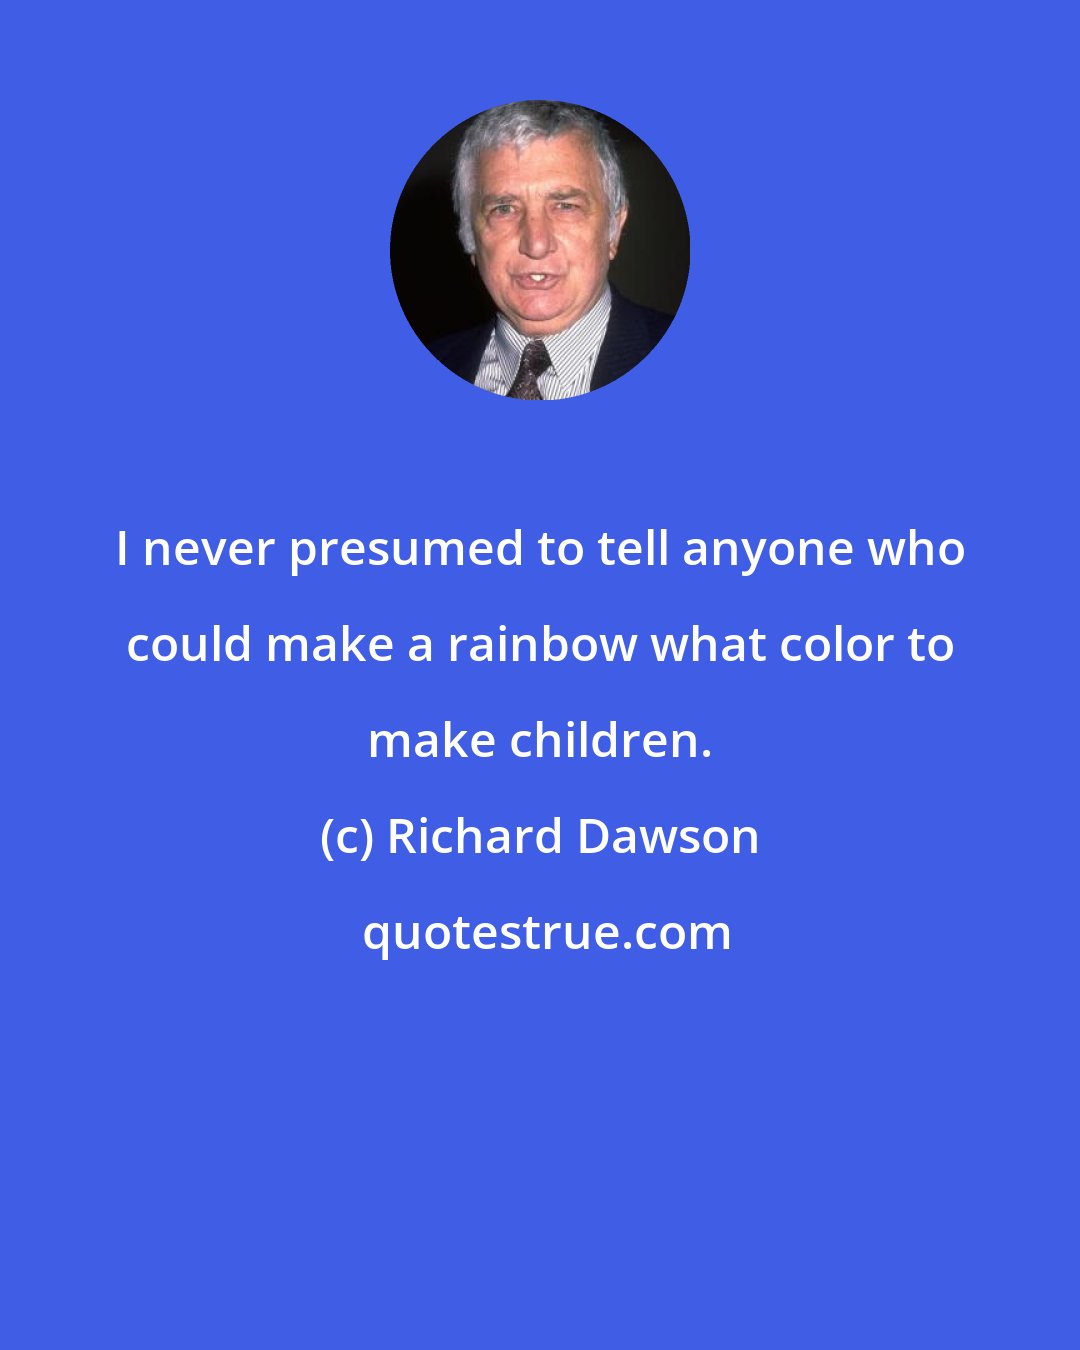 Richard Dawson: I never presumed to tell anyone who could make a rainbow what color to make children.